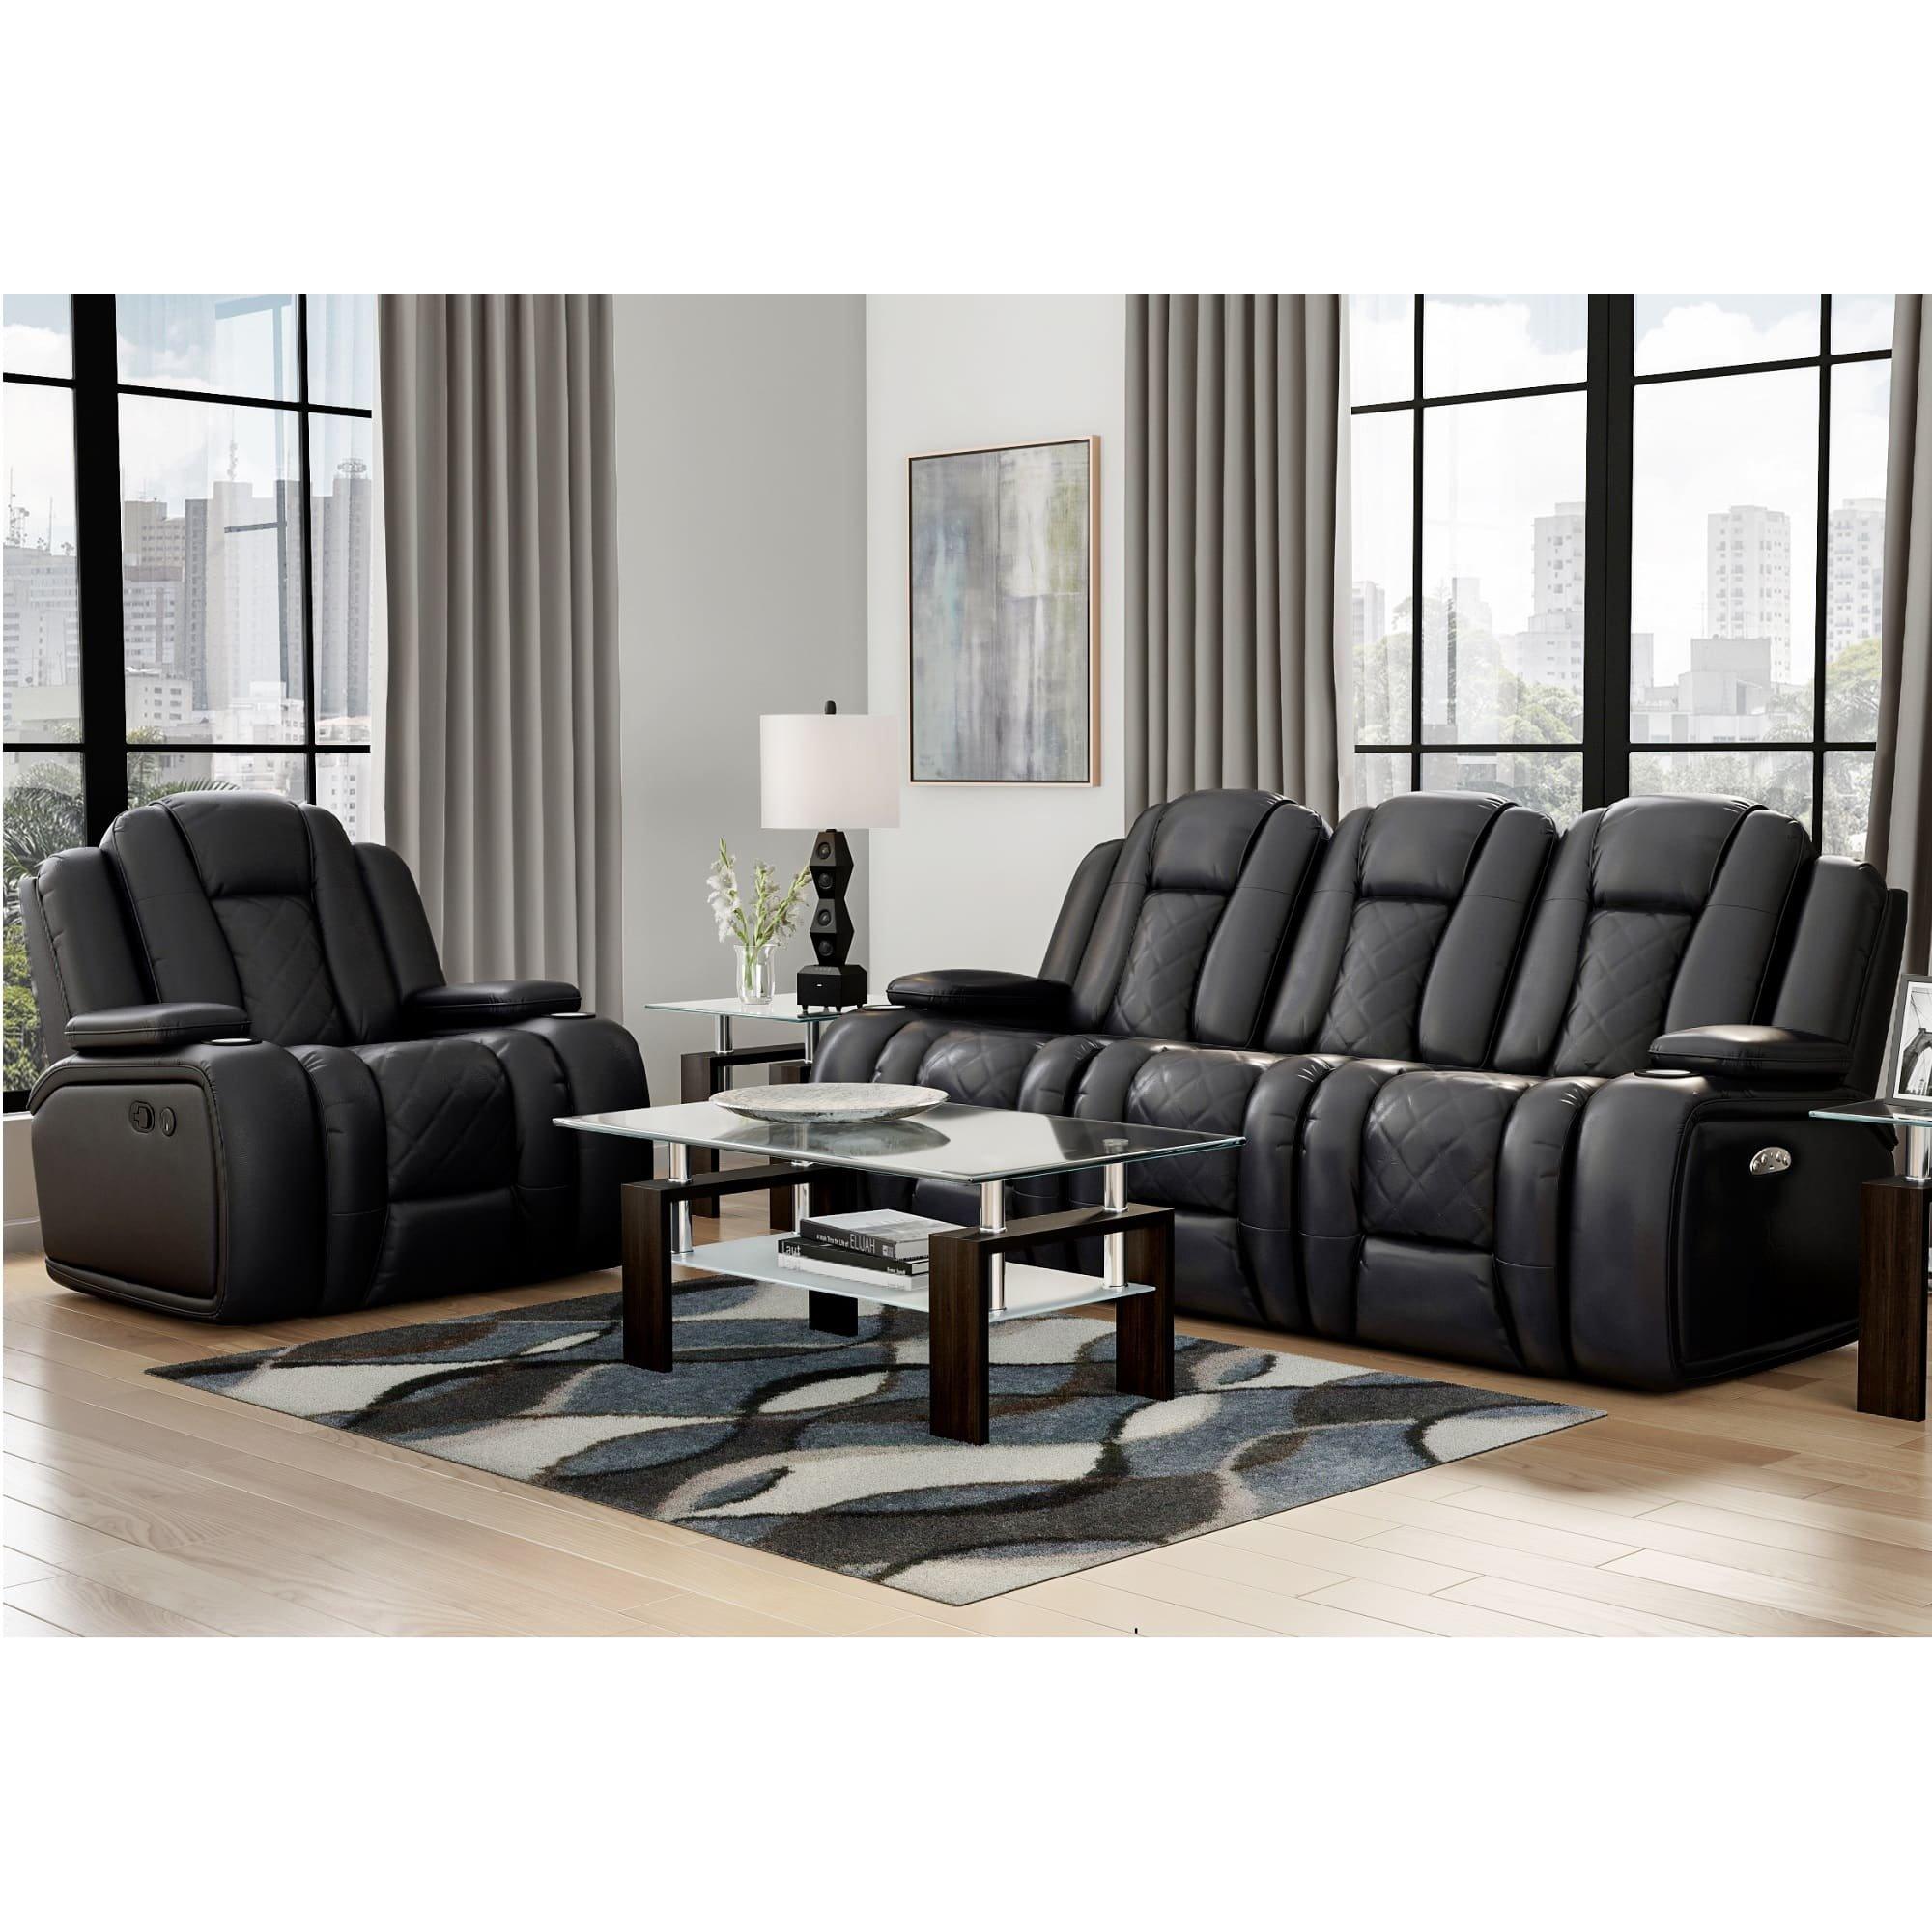 Rent To Own Synergy Home Furnishings 2 Piece Transformer Reclining Living Room Collection At Aarons Today